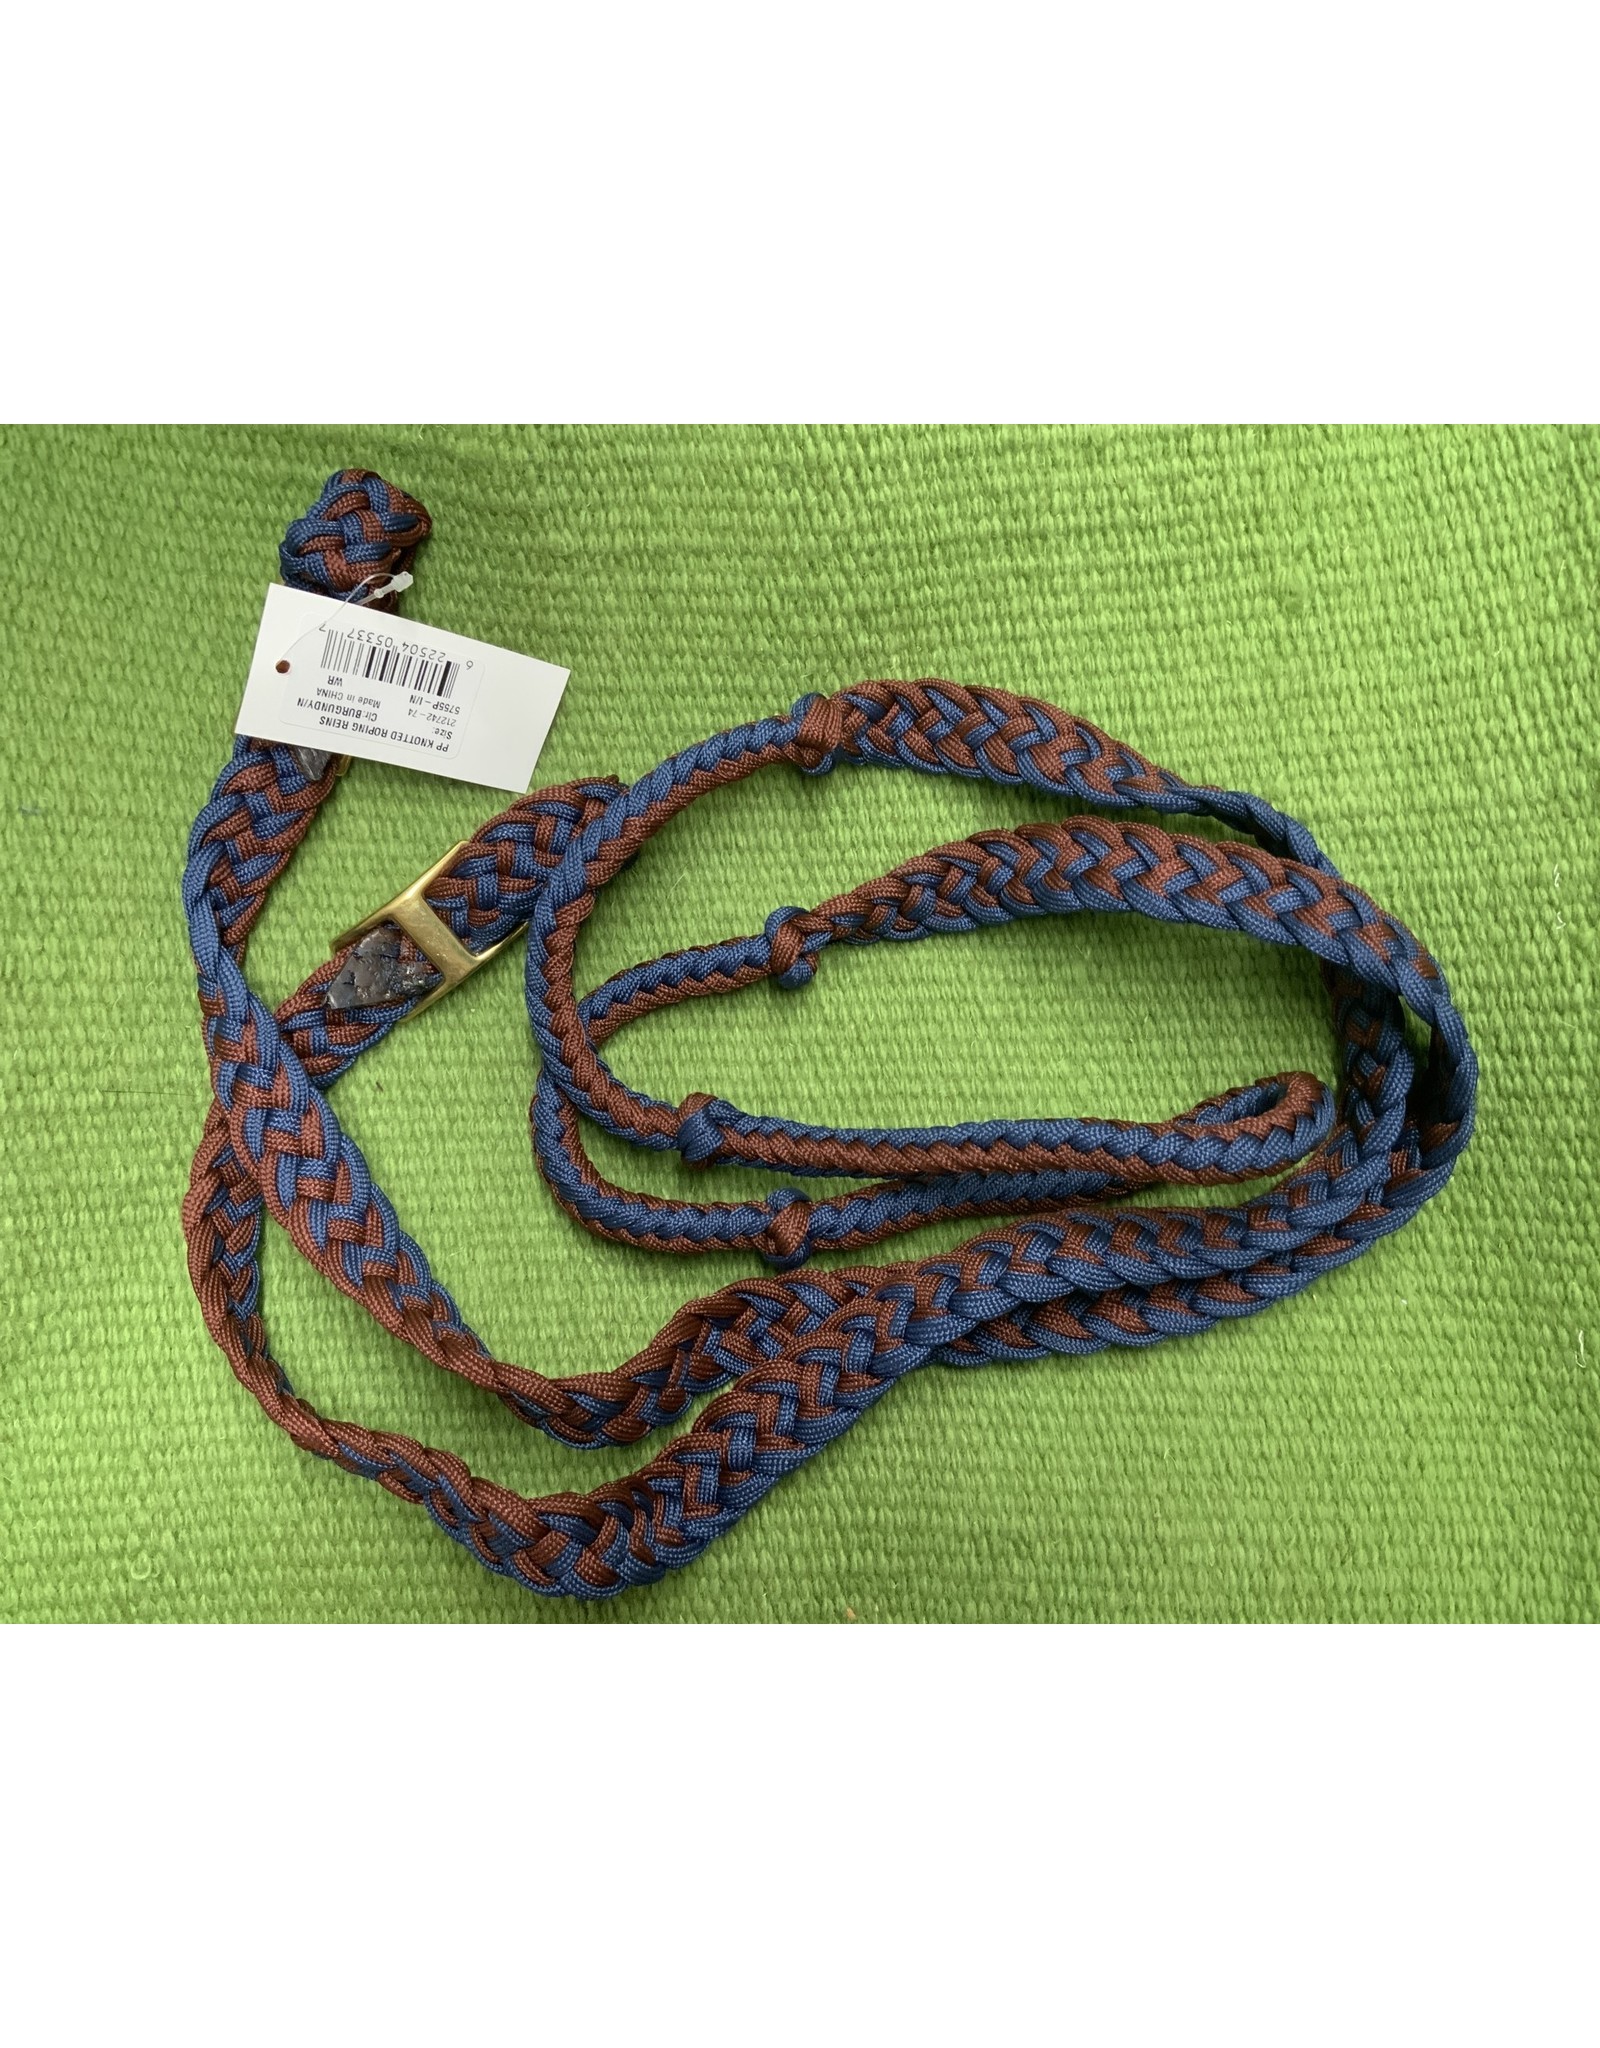 Braided Poly Knotted Roping Reins - Burgundy/Navy - #212742-74